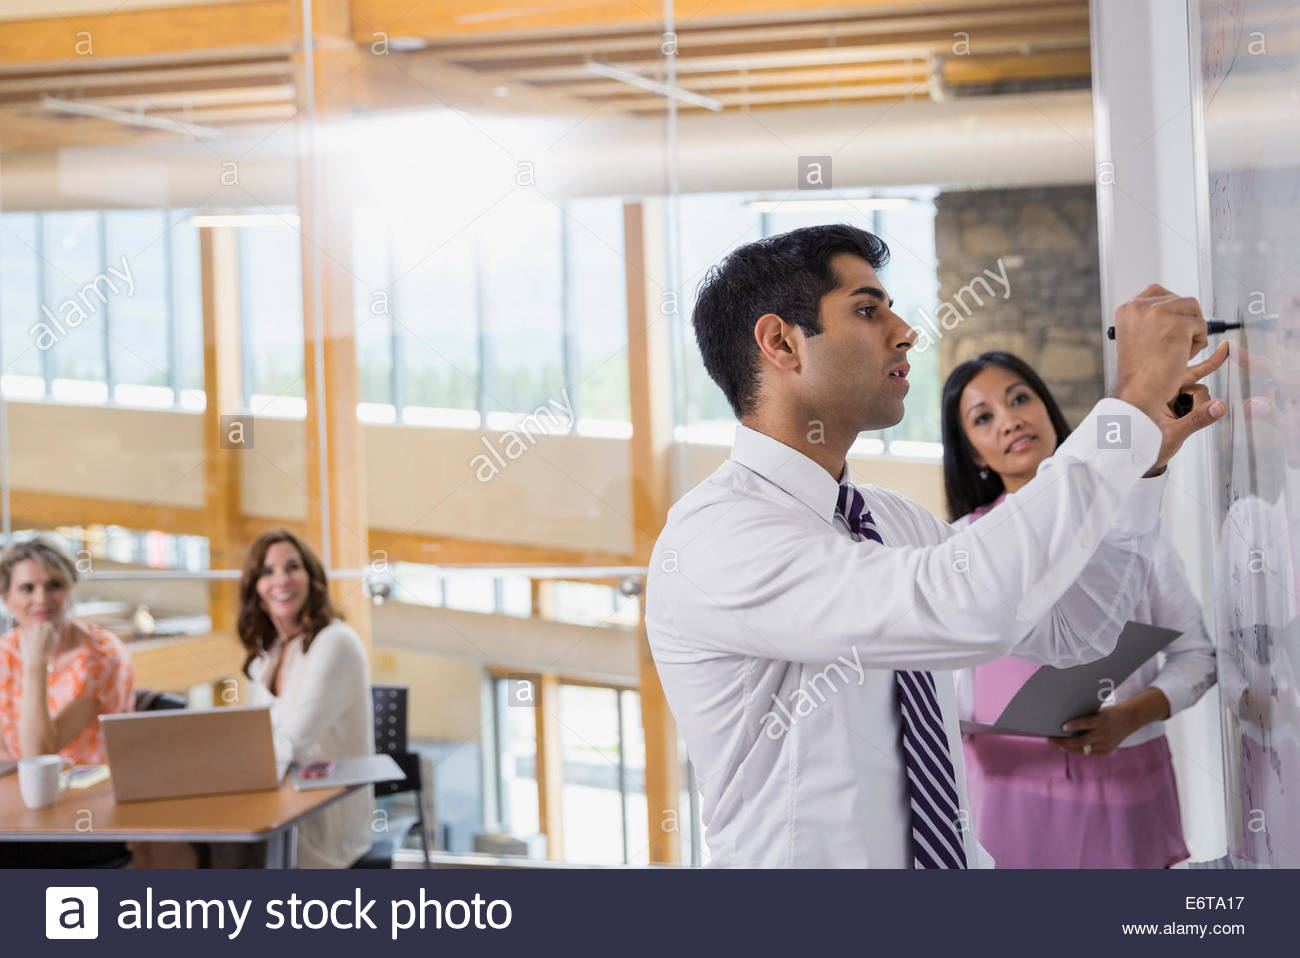 Businessman writing on white board in meeting Stock Photo